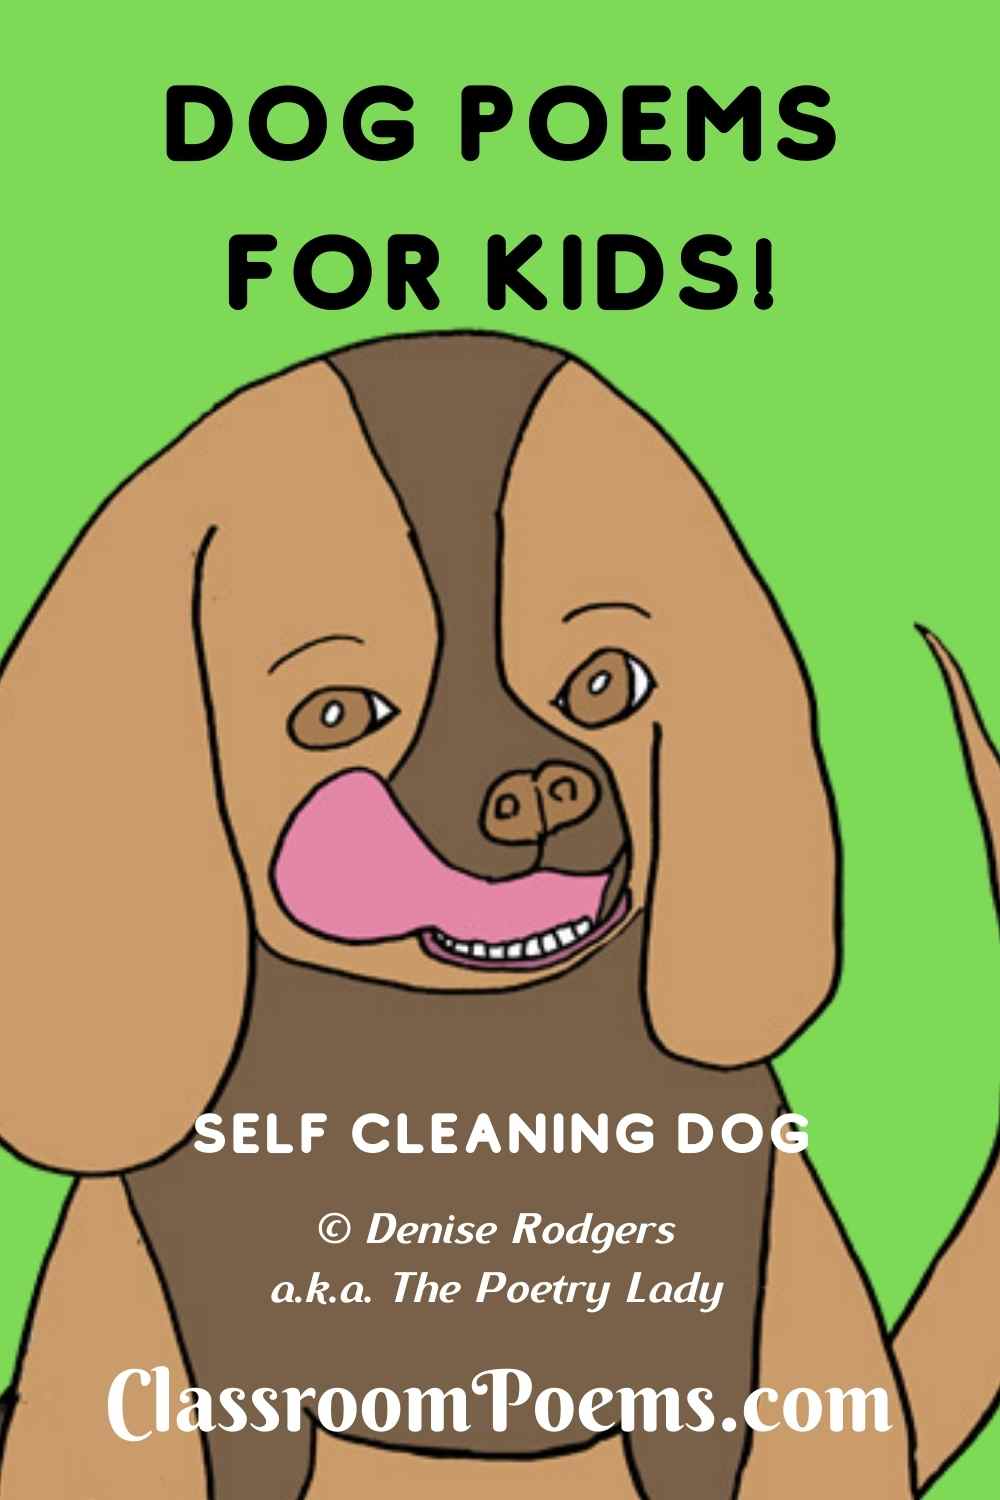 SELF-CLEANING DOG, a funny dog poem for kids by Poetry Lady Denise Rodgers on ClassroomPoems.com.